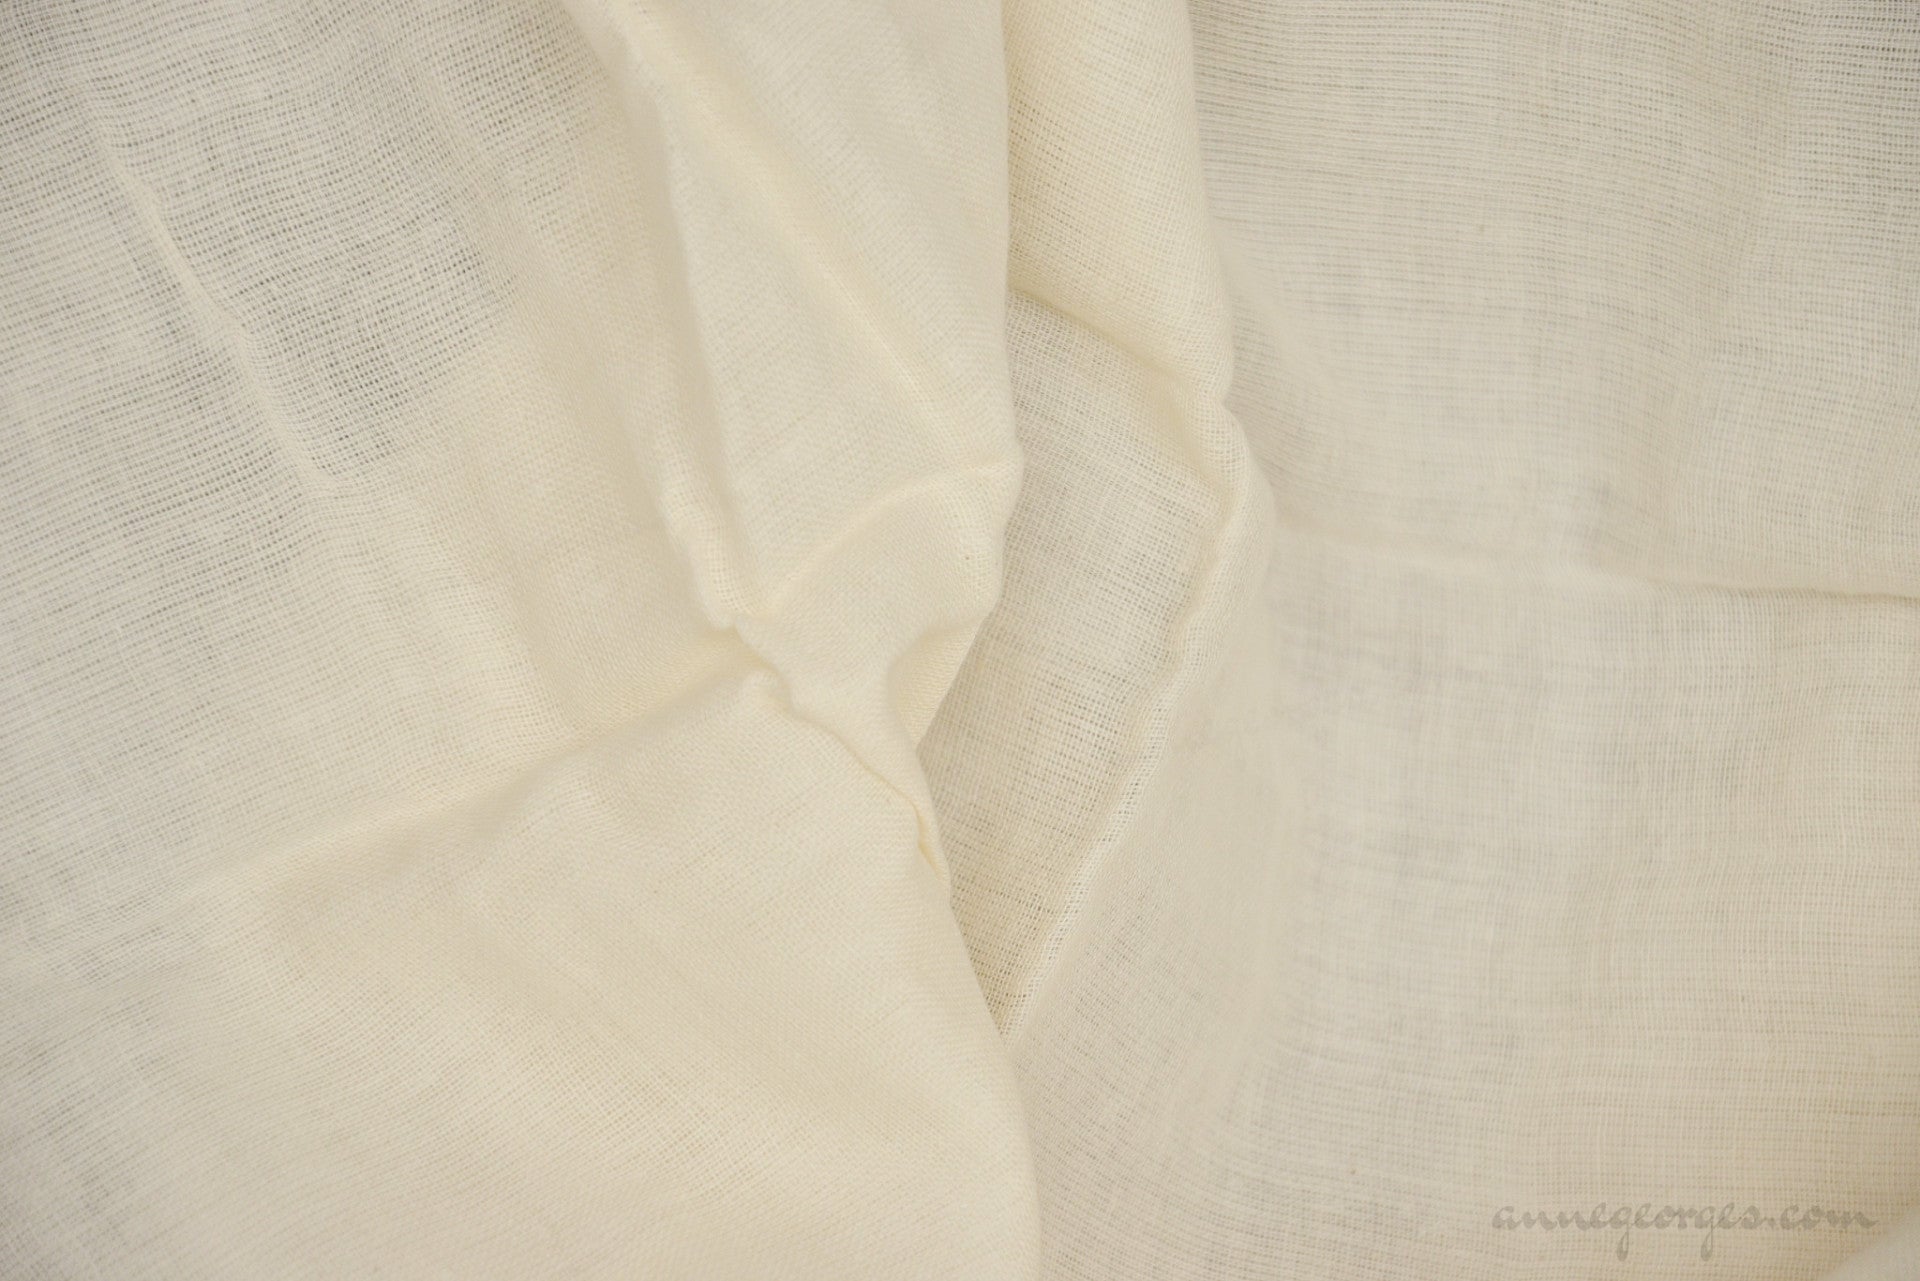 Organic Cotton double gauze fabric by the yard. Unbleached cotton